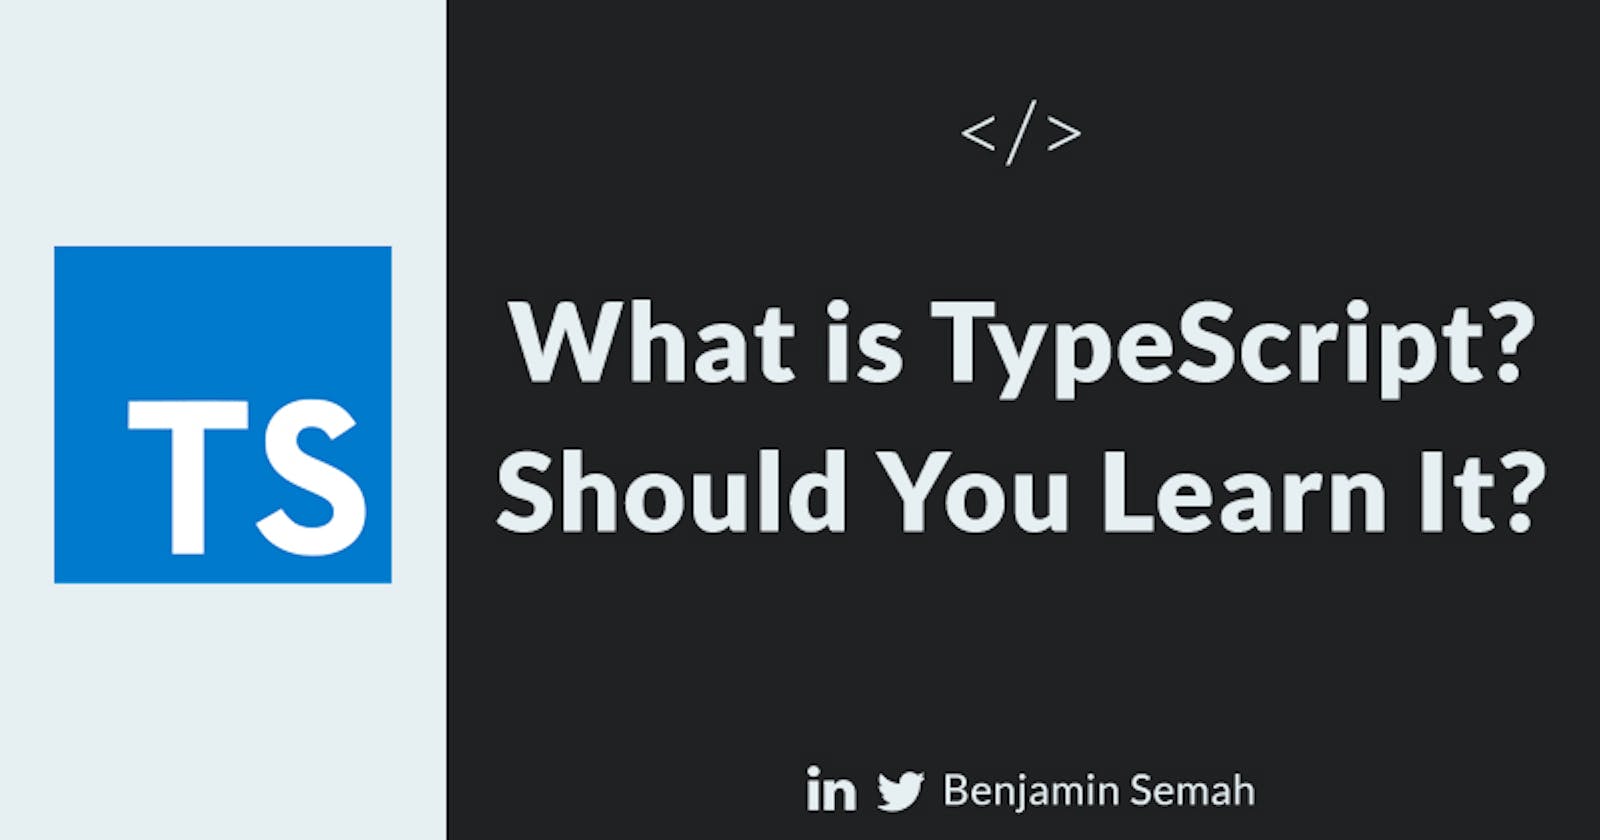 What is TypeScript? And Should You Learn it?